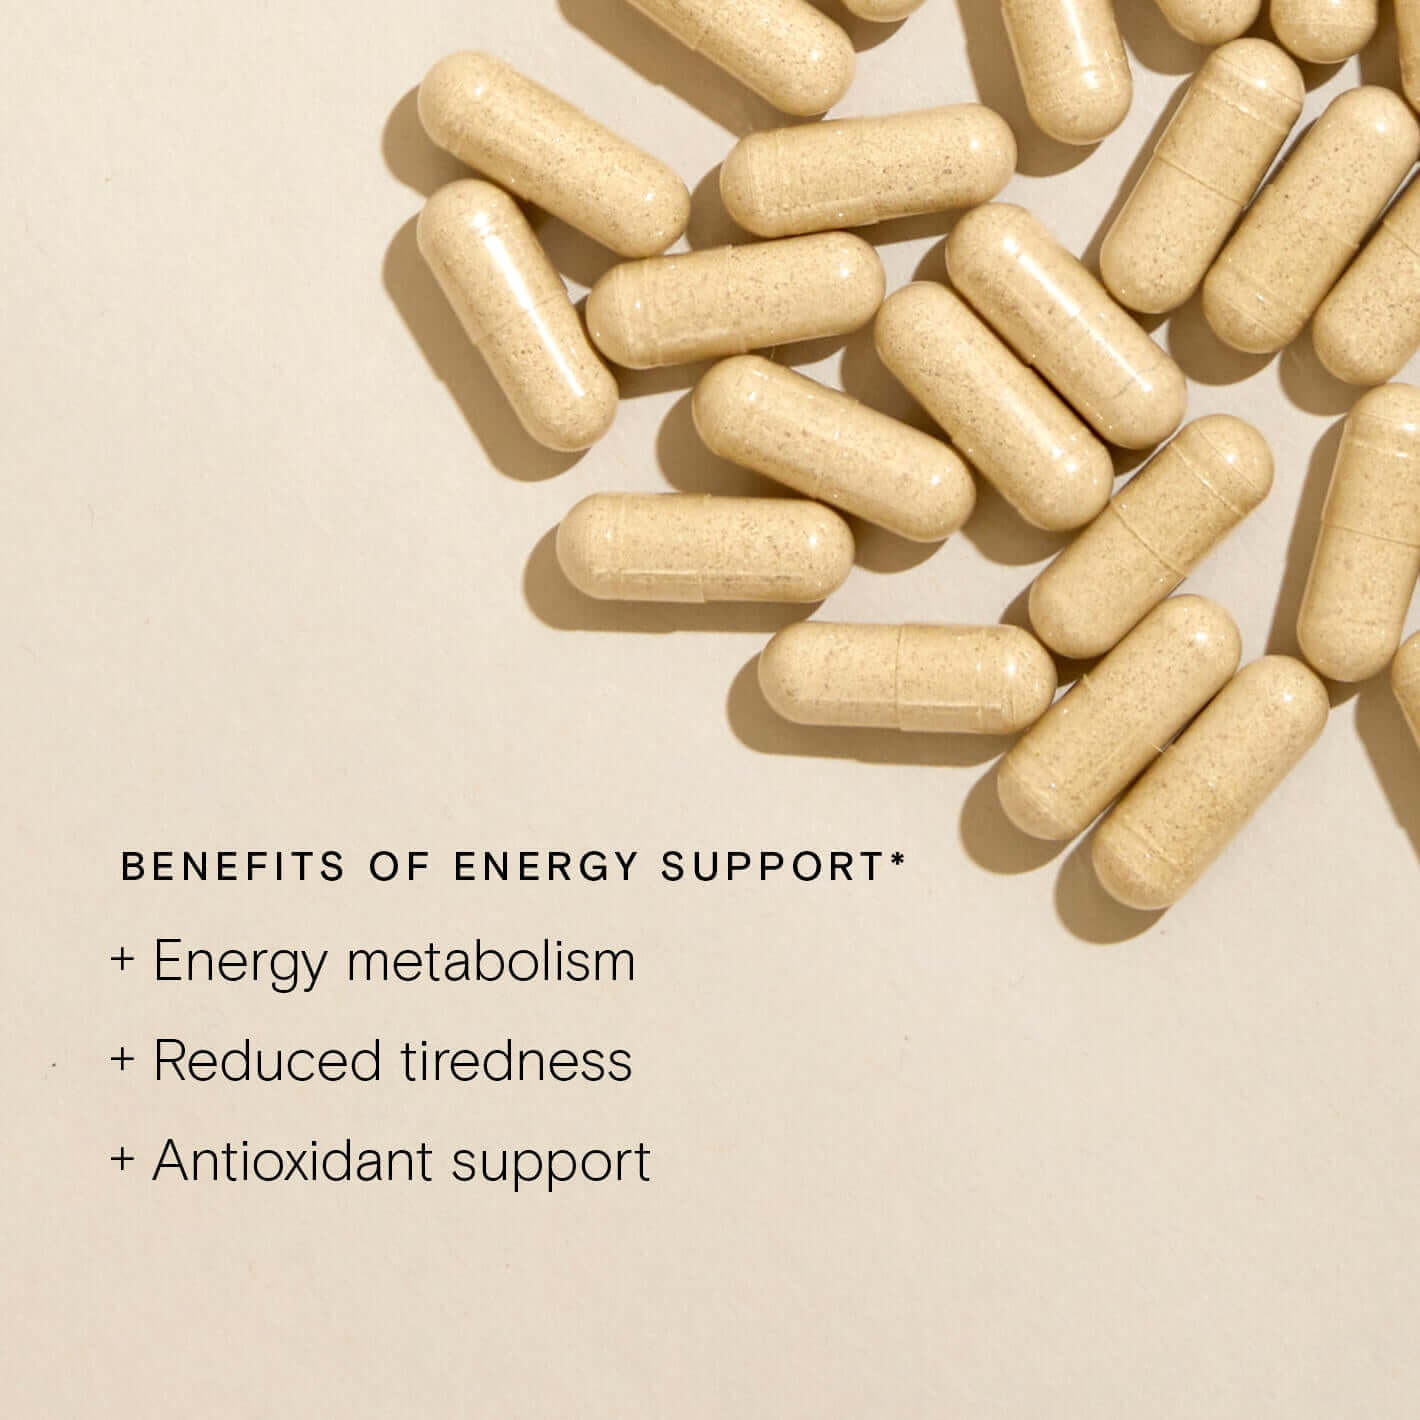 Food-Grown® Energy Support